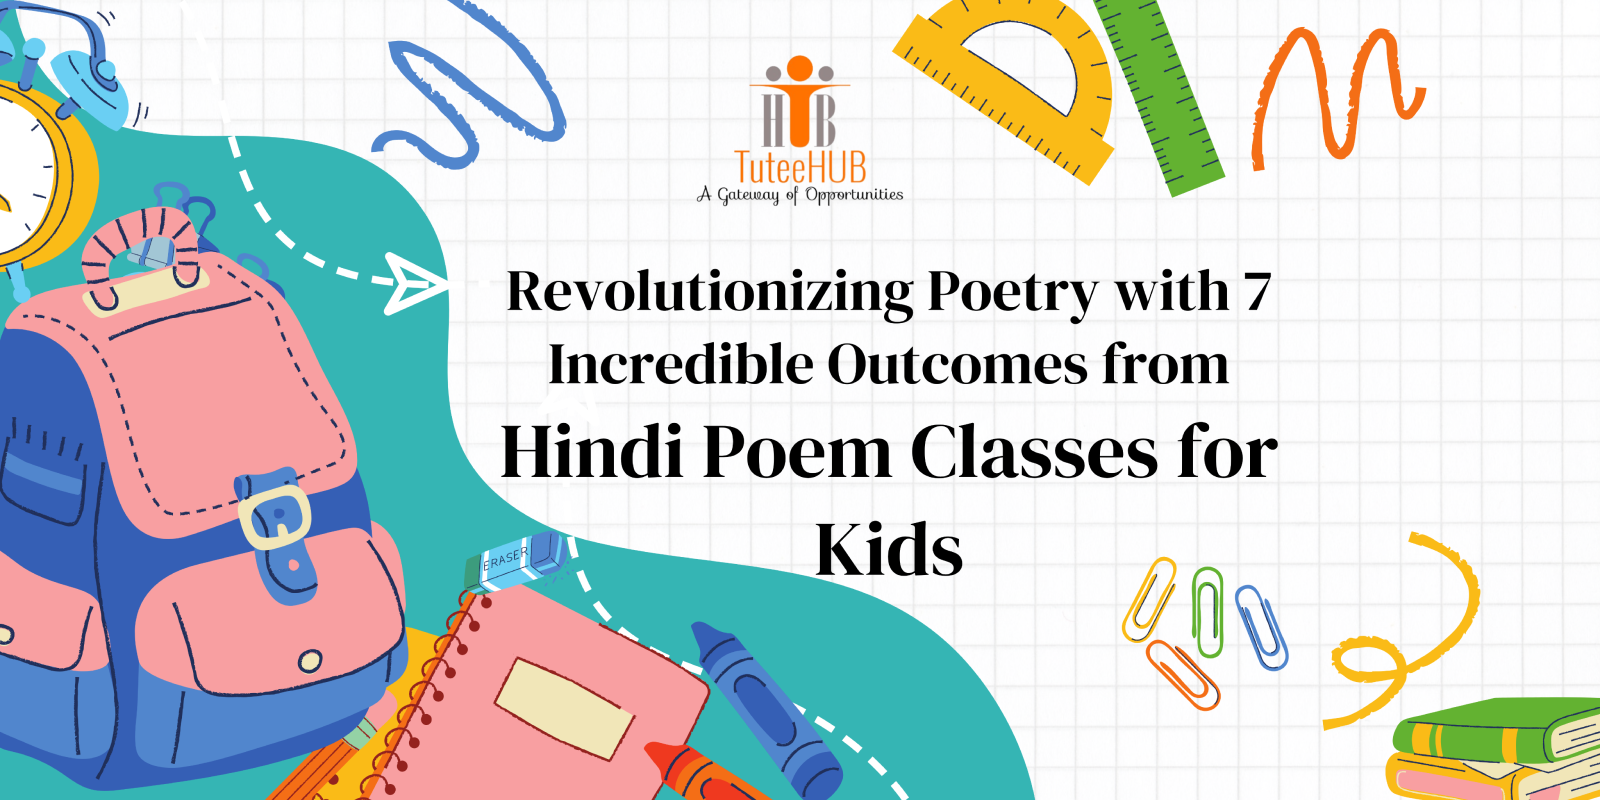 3 Revolutionizing Poetry with 7 Incredible Outcomes from Hindi Poem Classes for Kids